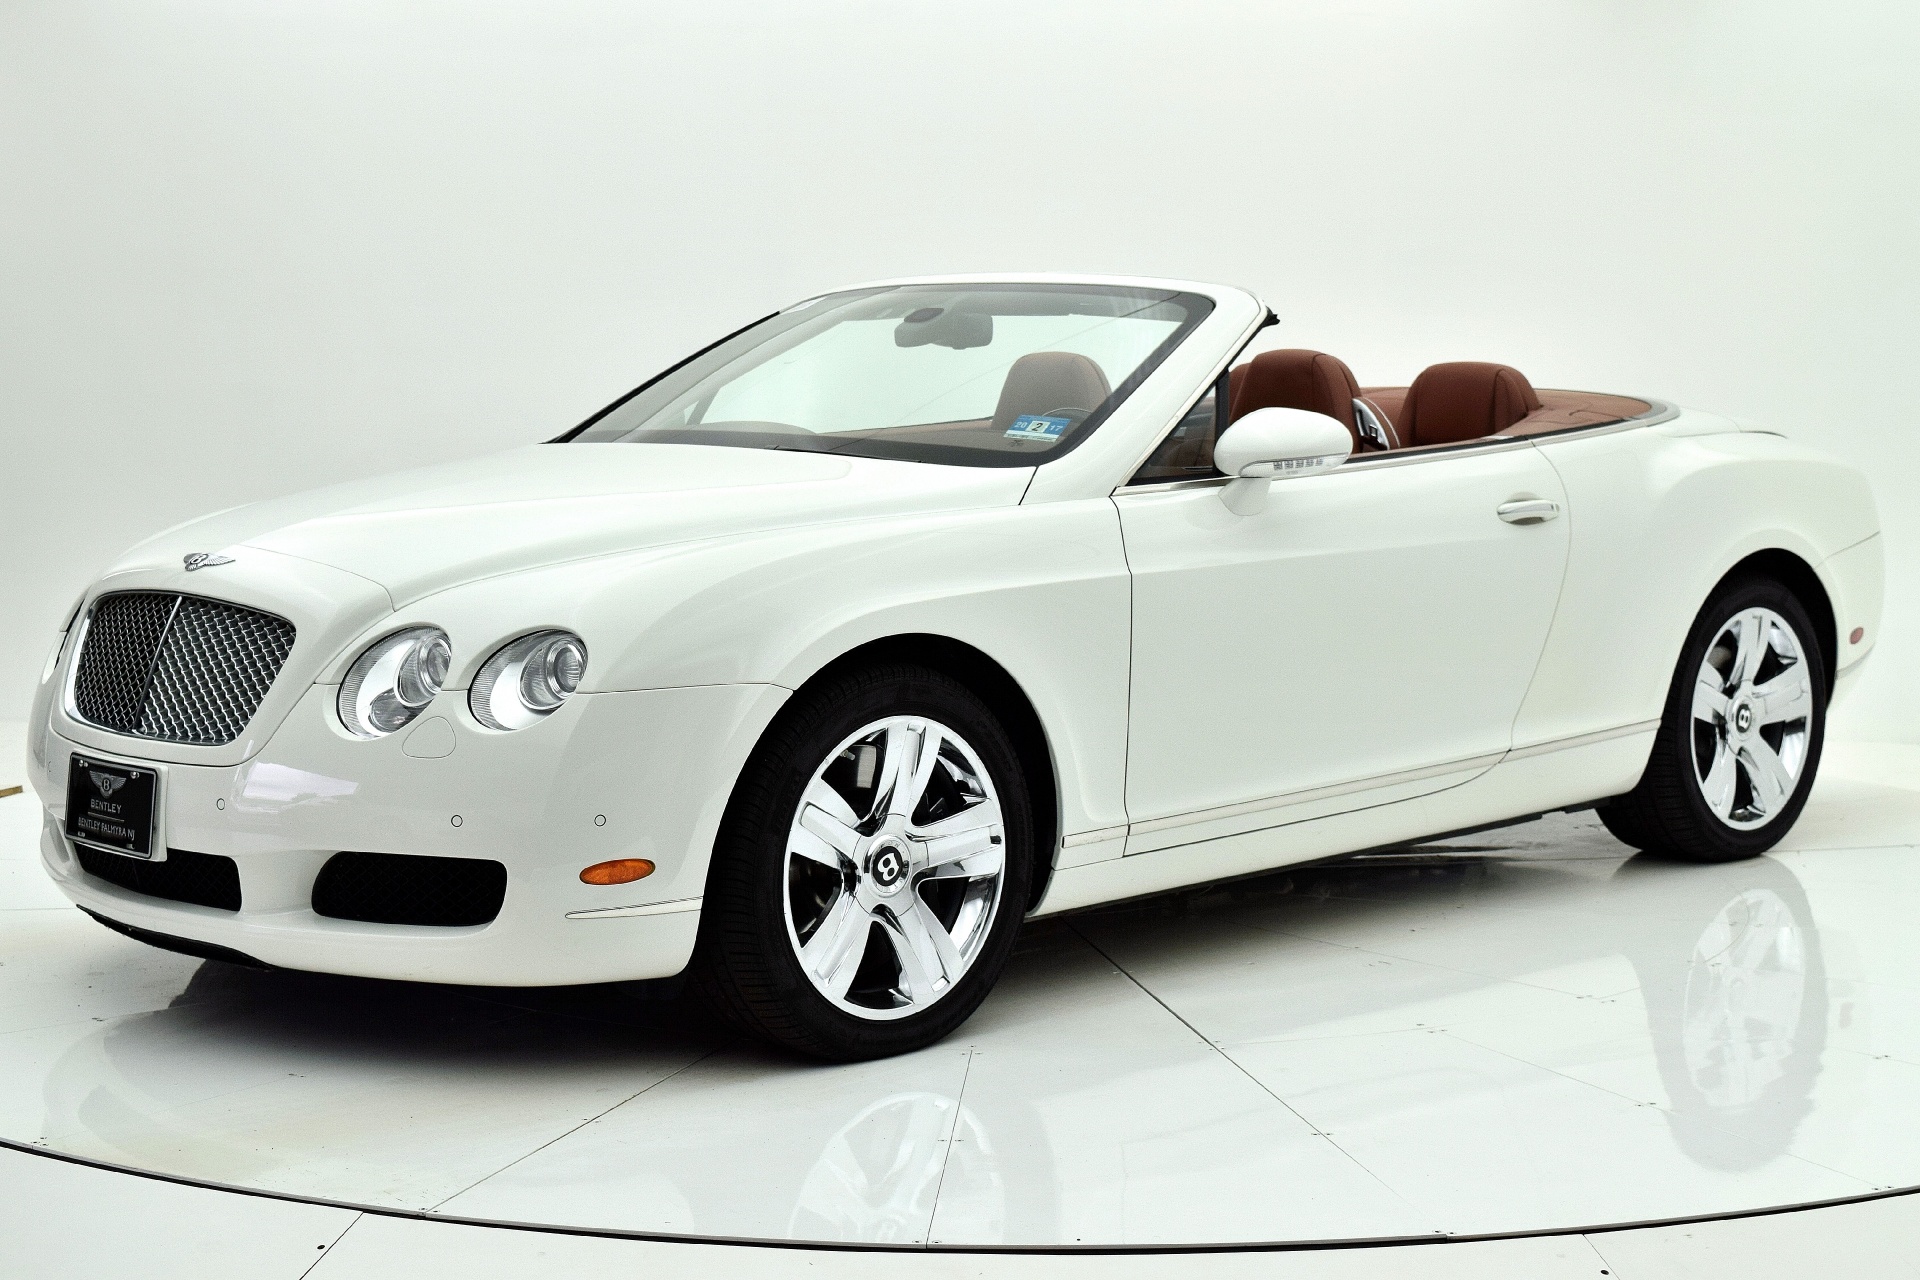 Used 2008 Bentley Continental GT W-12 Convertible for sale Sold at Bentley Palmyra N.J. in Palmyra NJ 08065 2